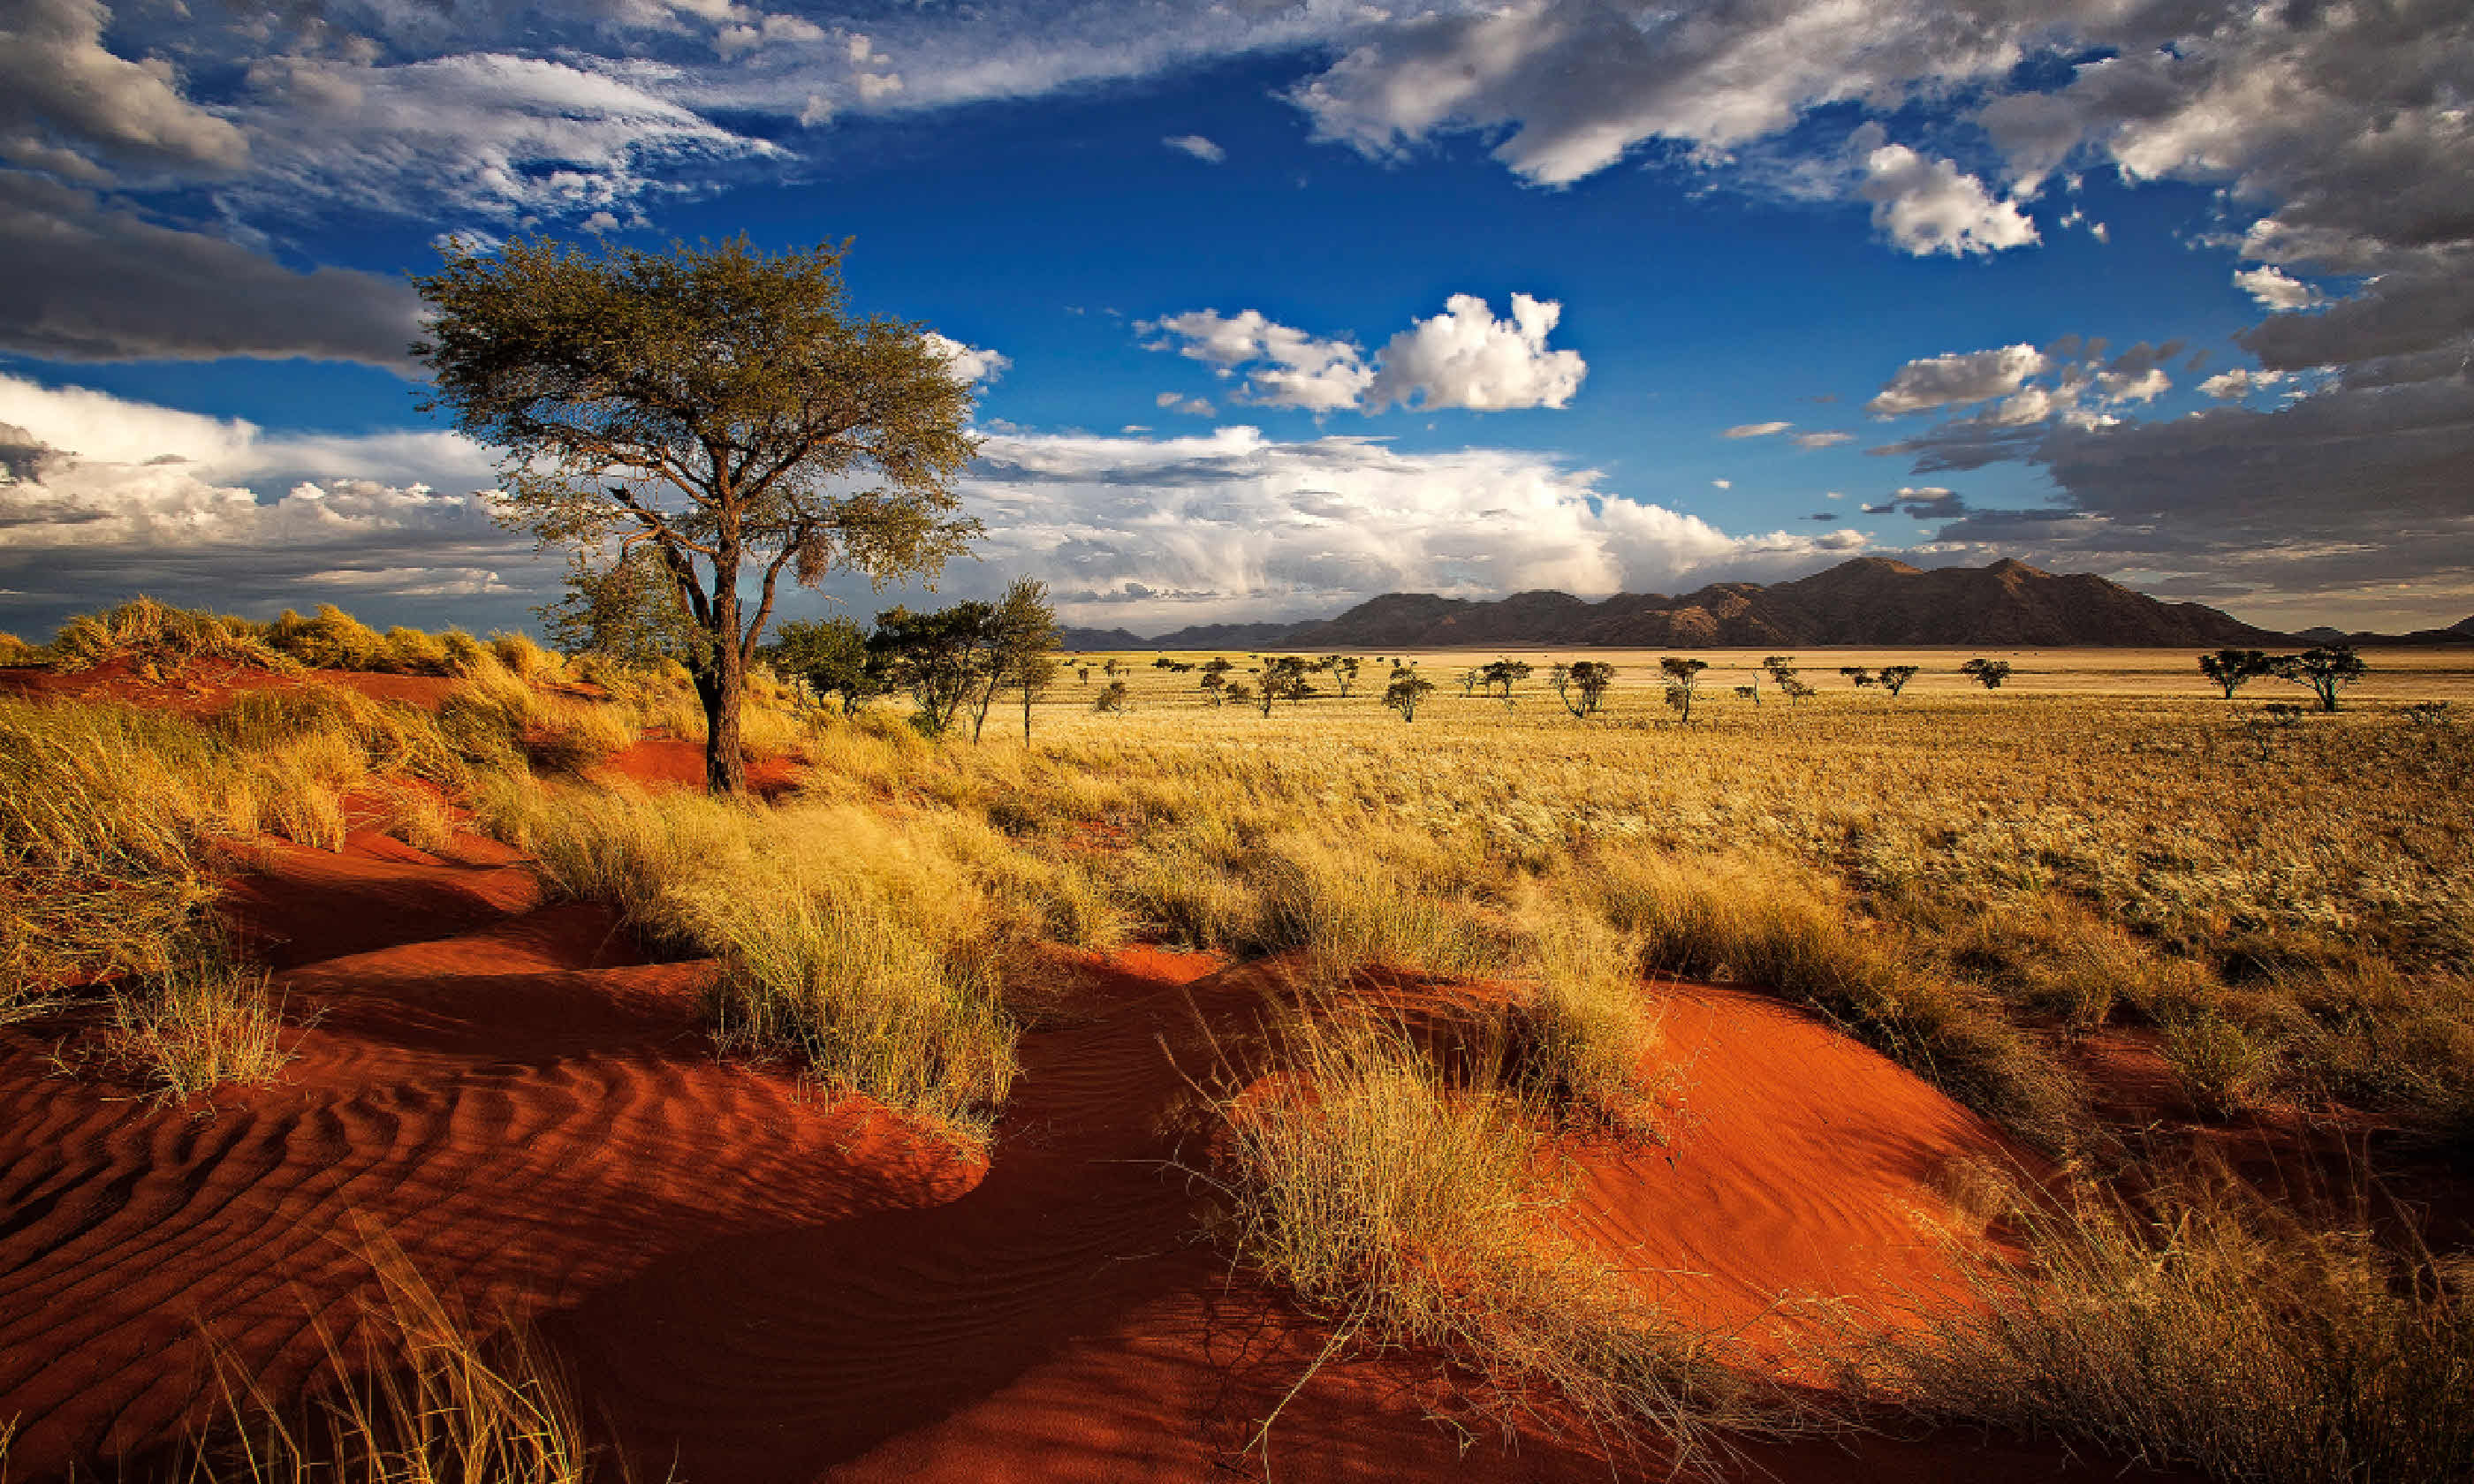 Private nature reserve in Namibia (Shutterstock)